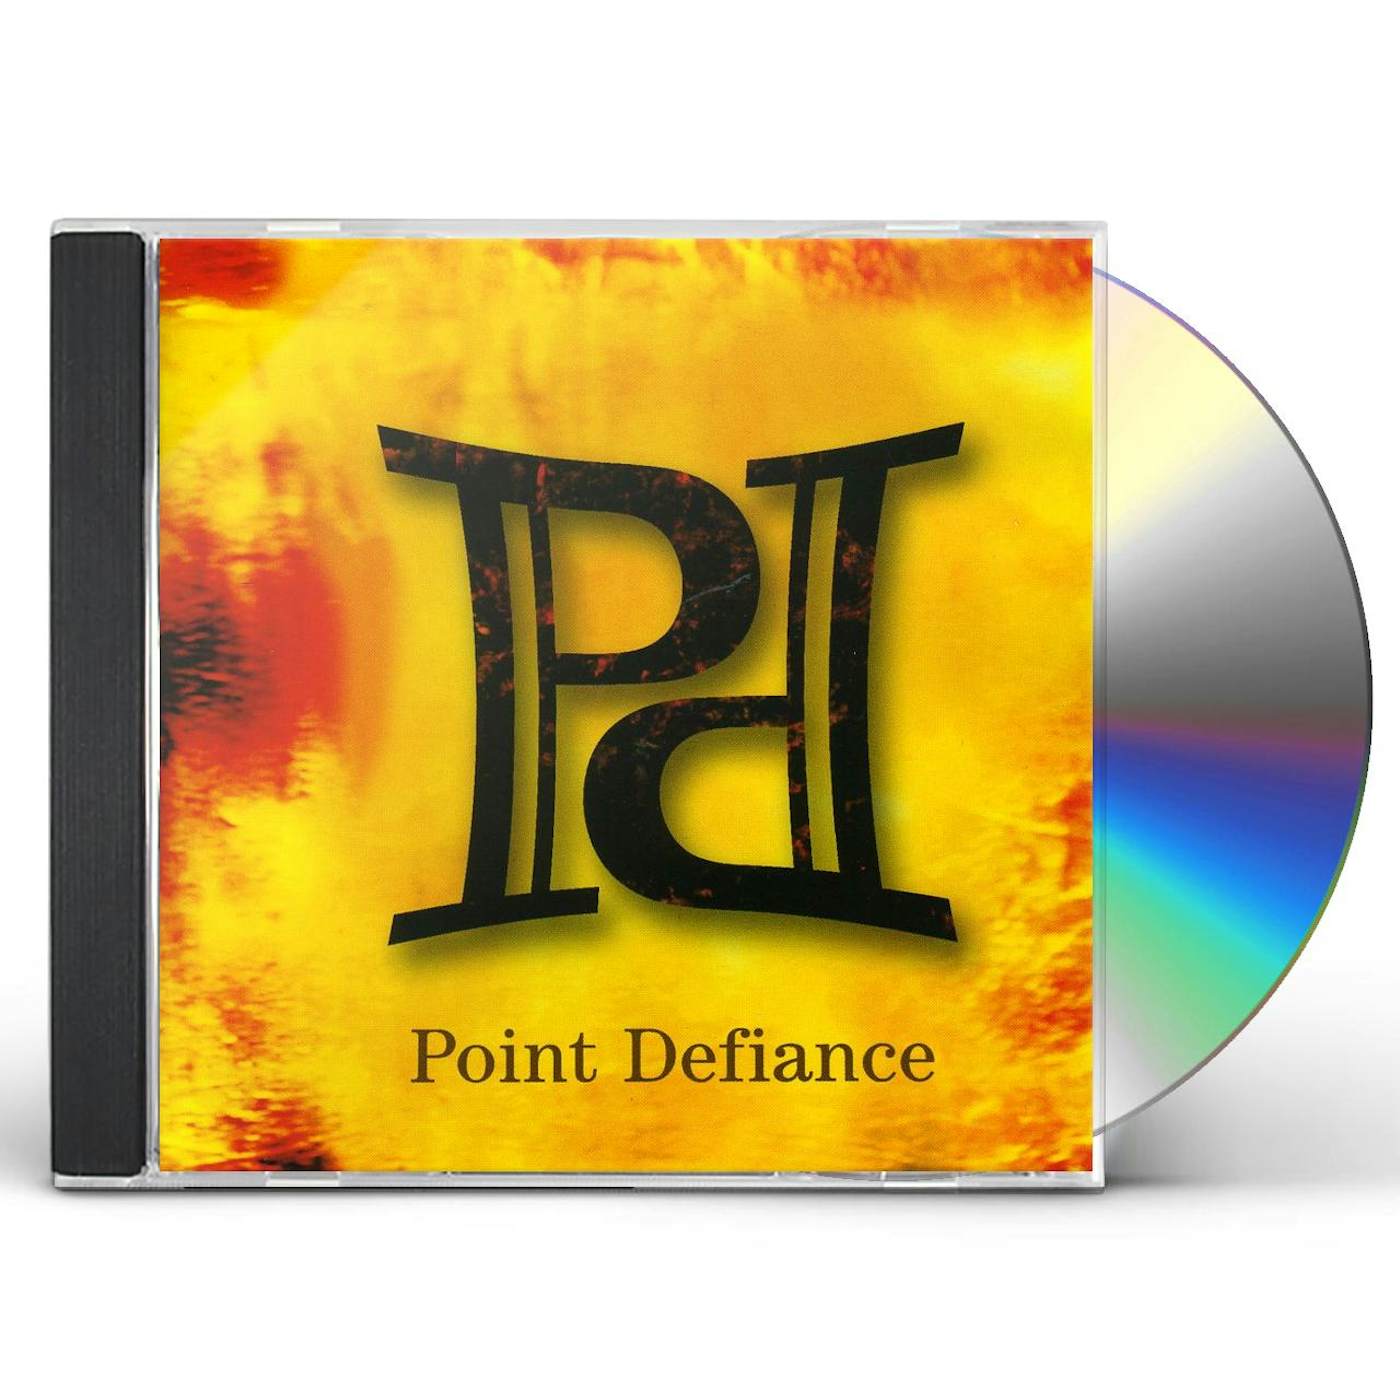 POINT DEFIANCE CD